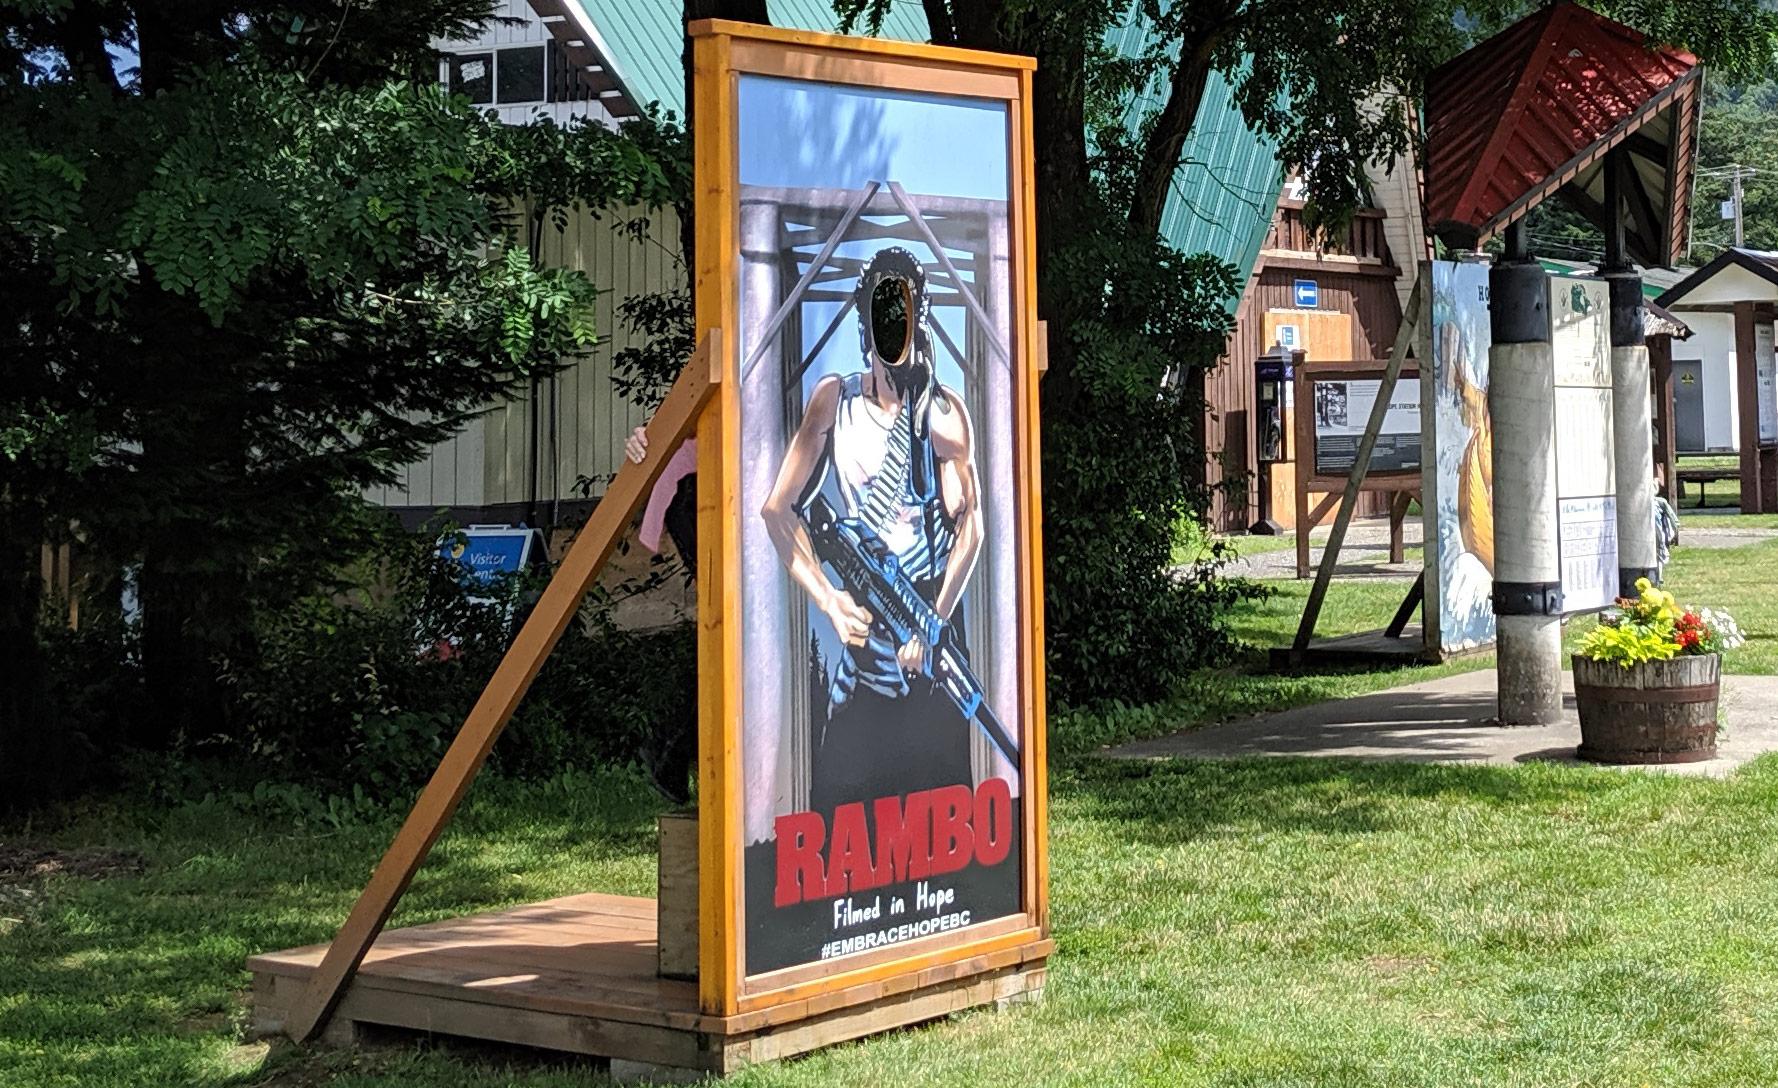 After hiring a one-way car rental from Vancouver to Calgary, we look for the top things to do in Hope, BC. We chose the Rambo - First Blood Walking Tour.